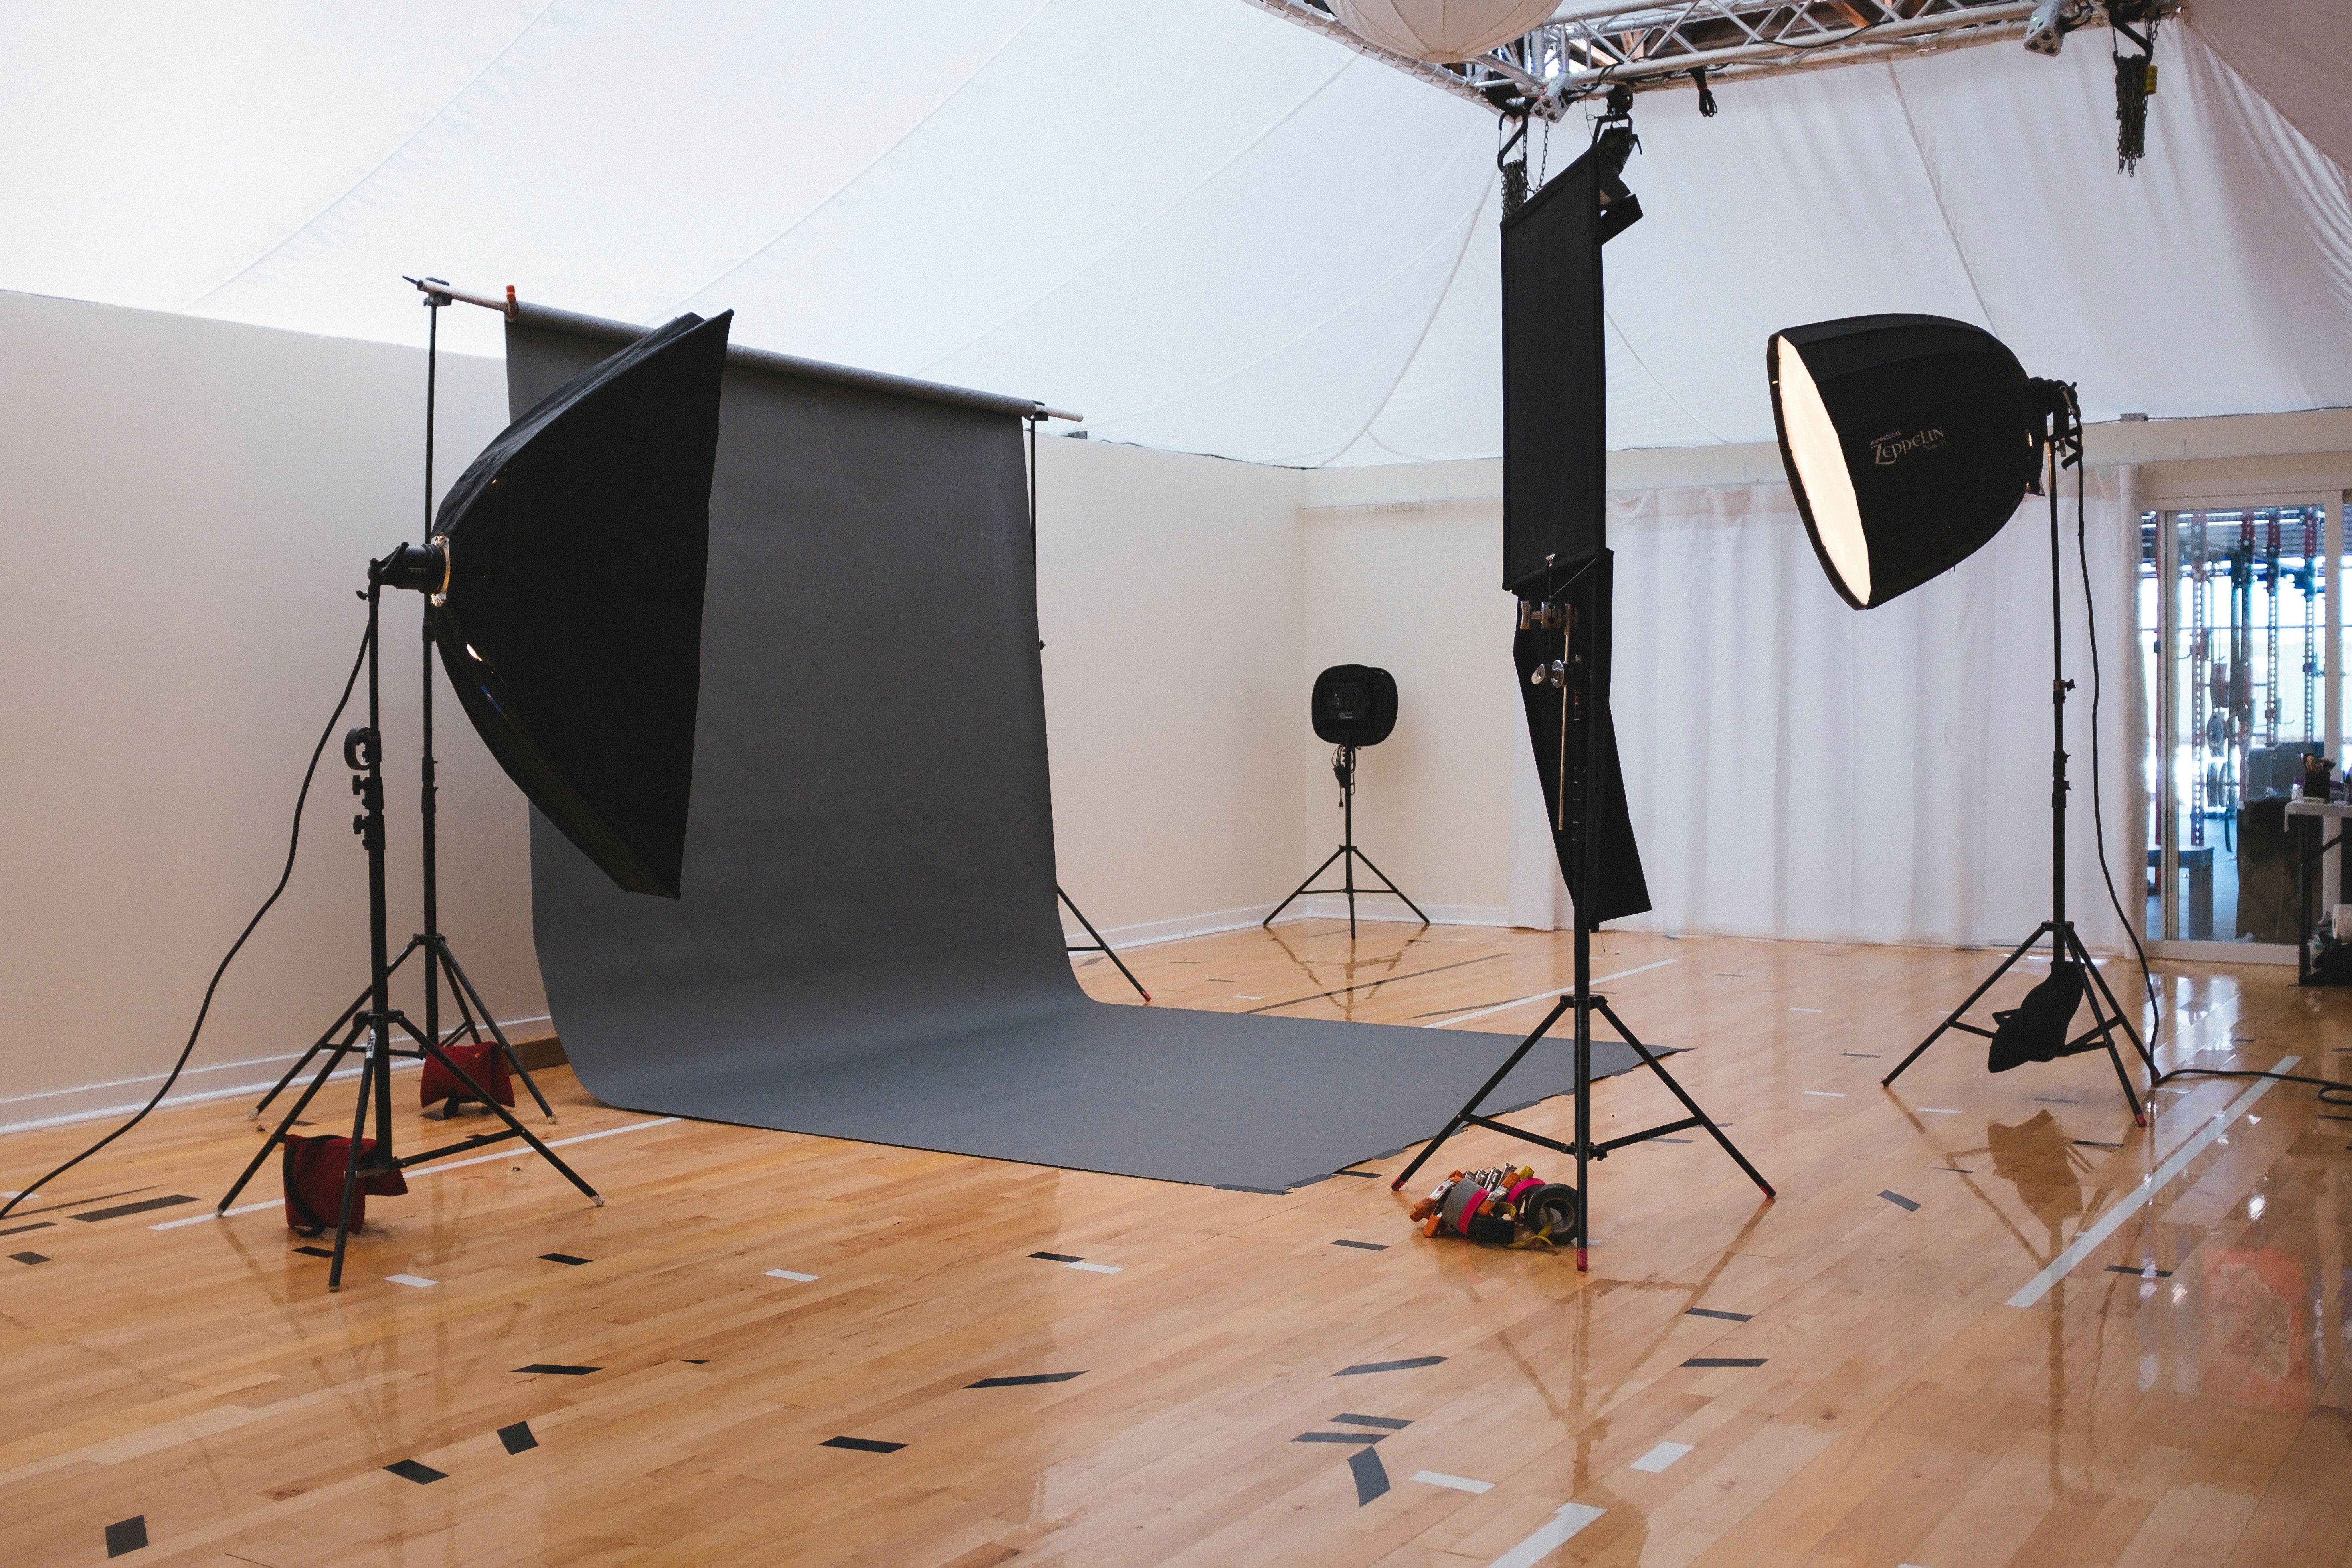 An empty photography studio with just a build up set